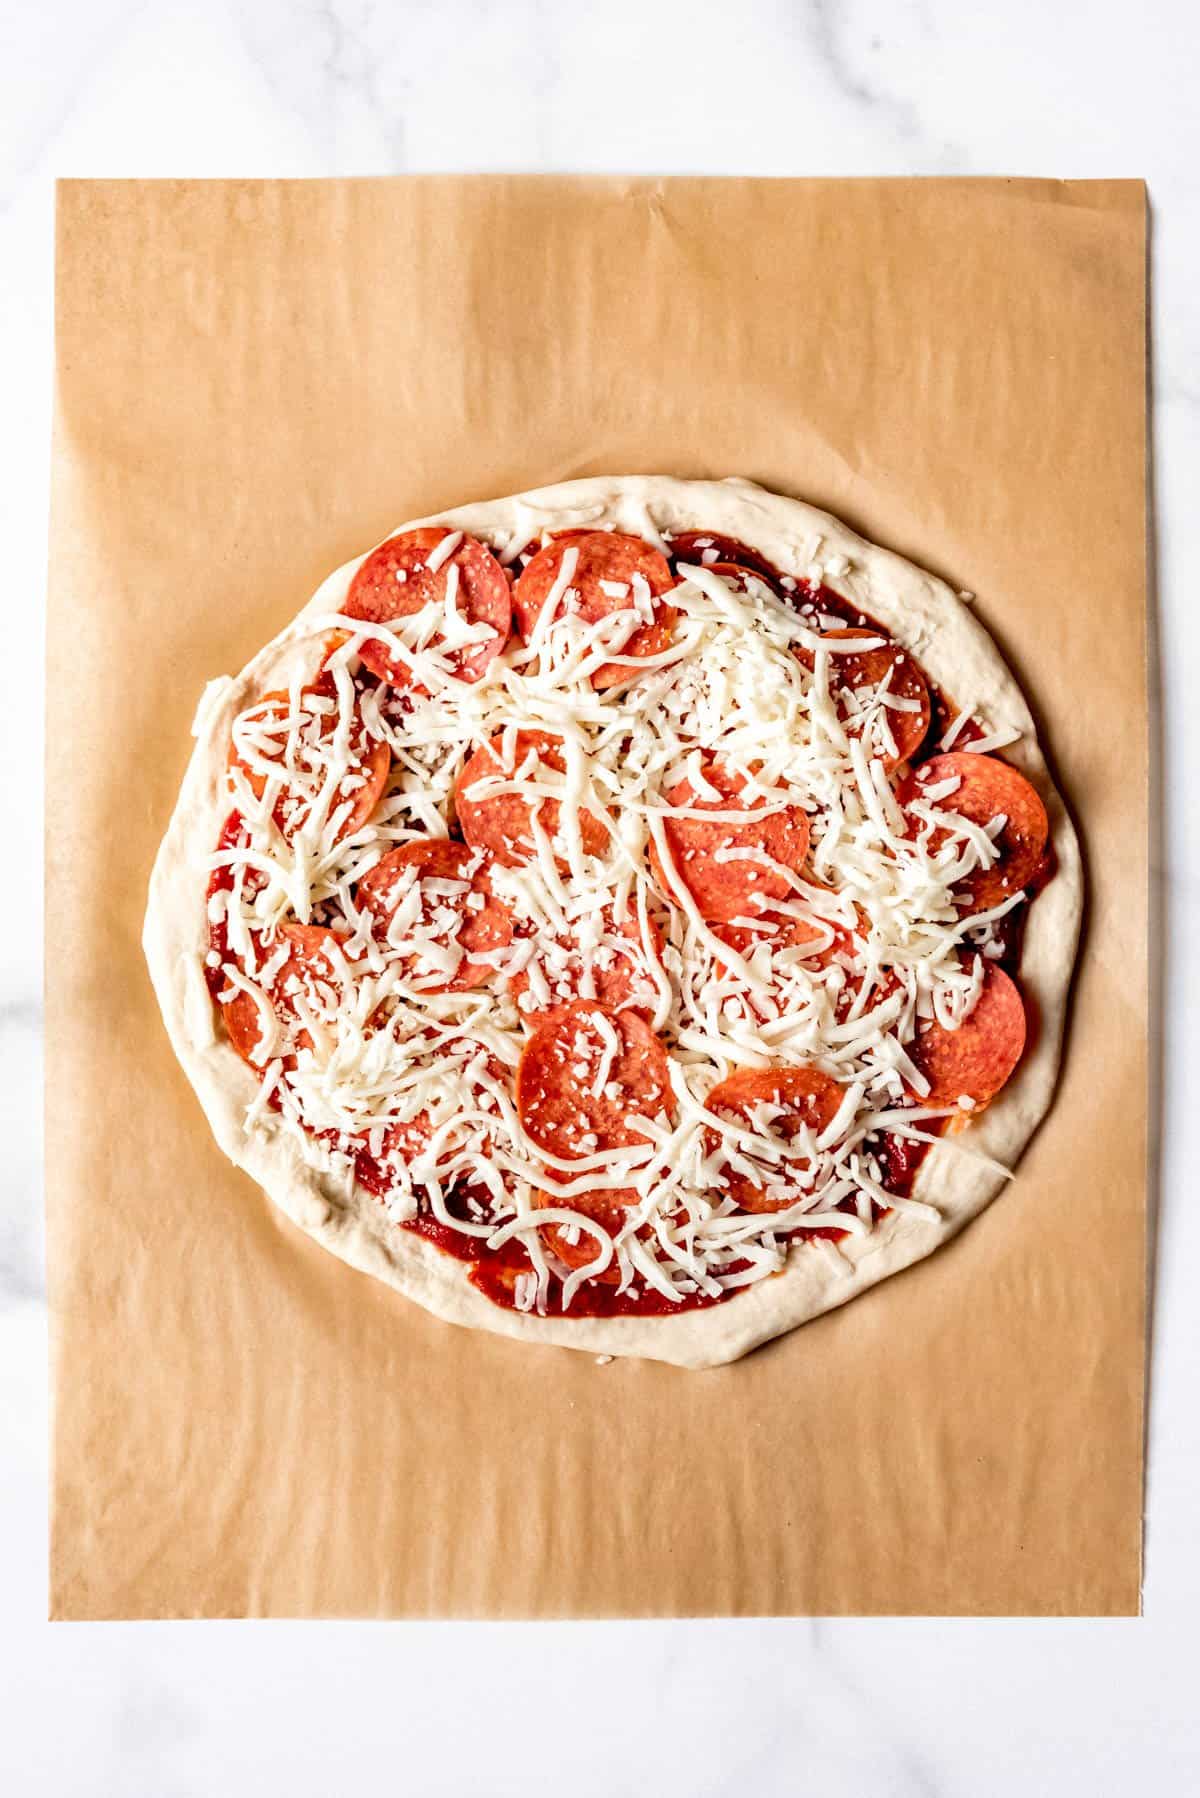 Sprinkled mozzarella cheese over pepperoni pizza before baking.